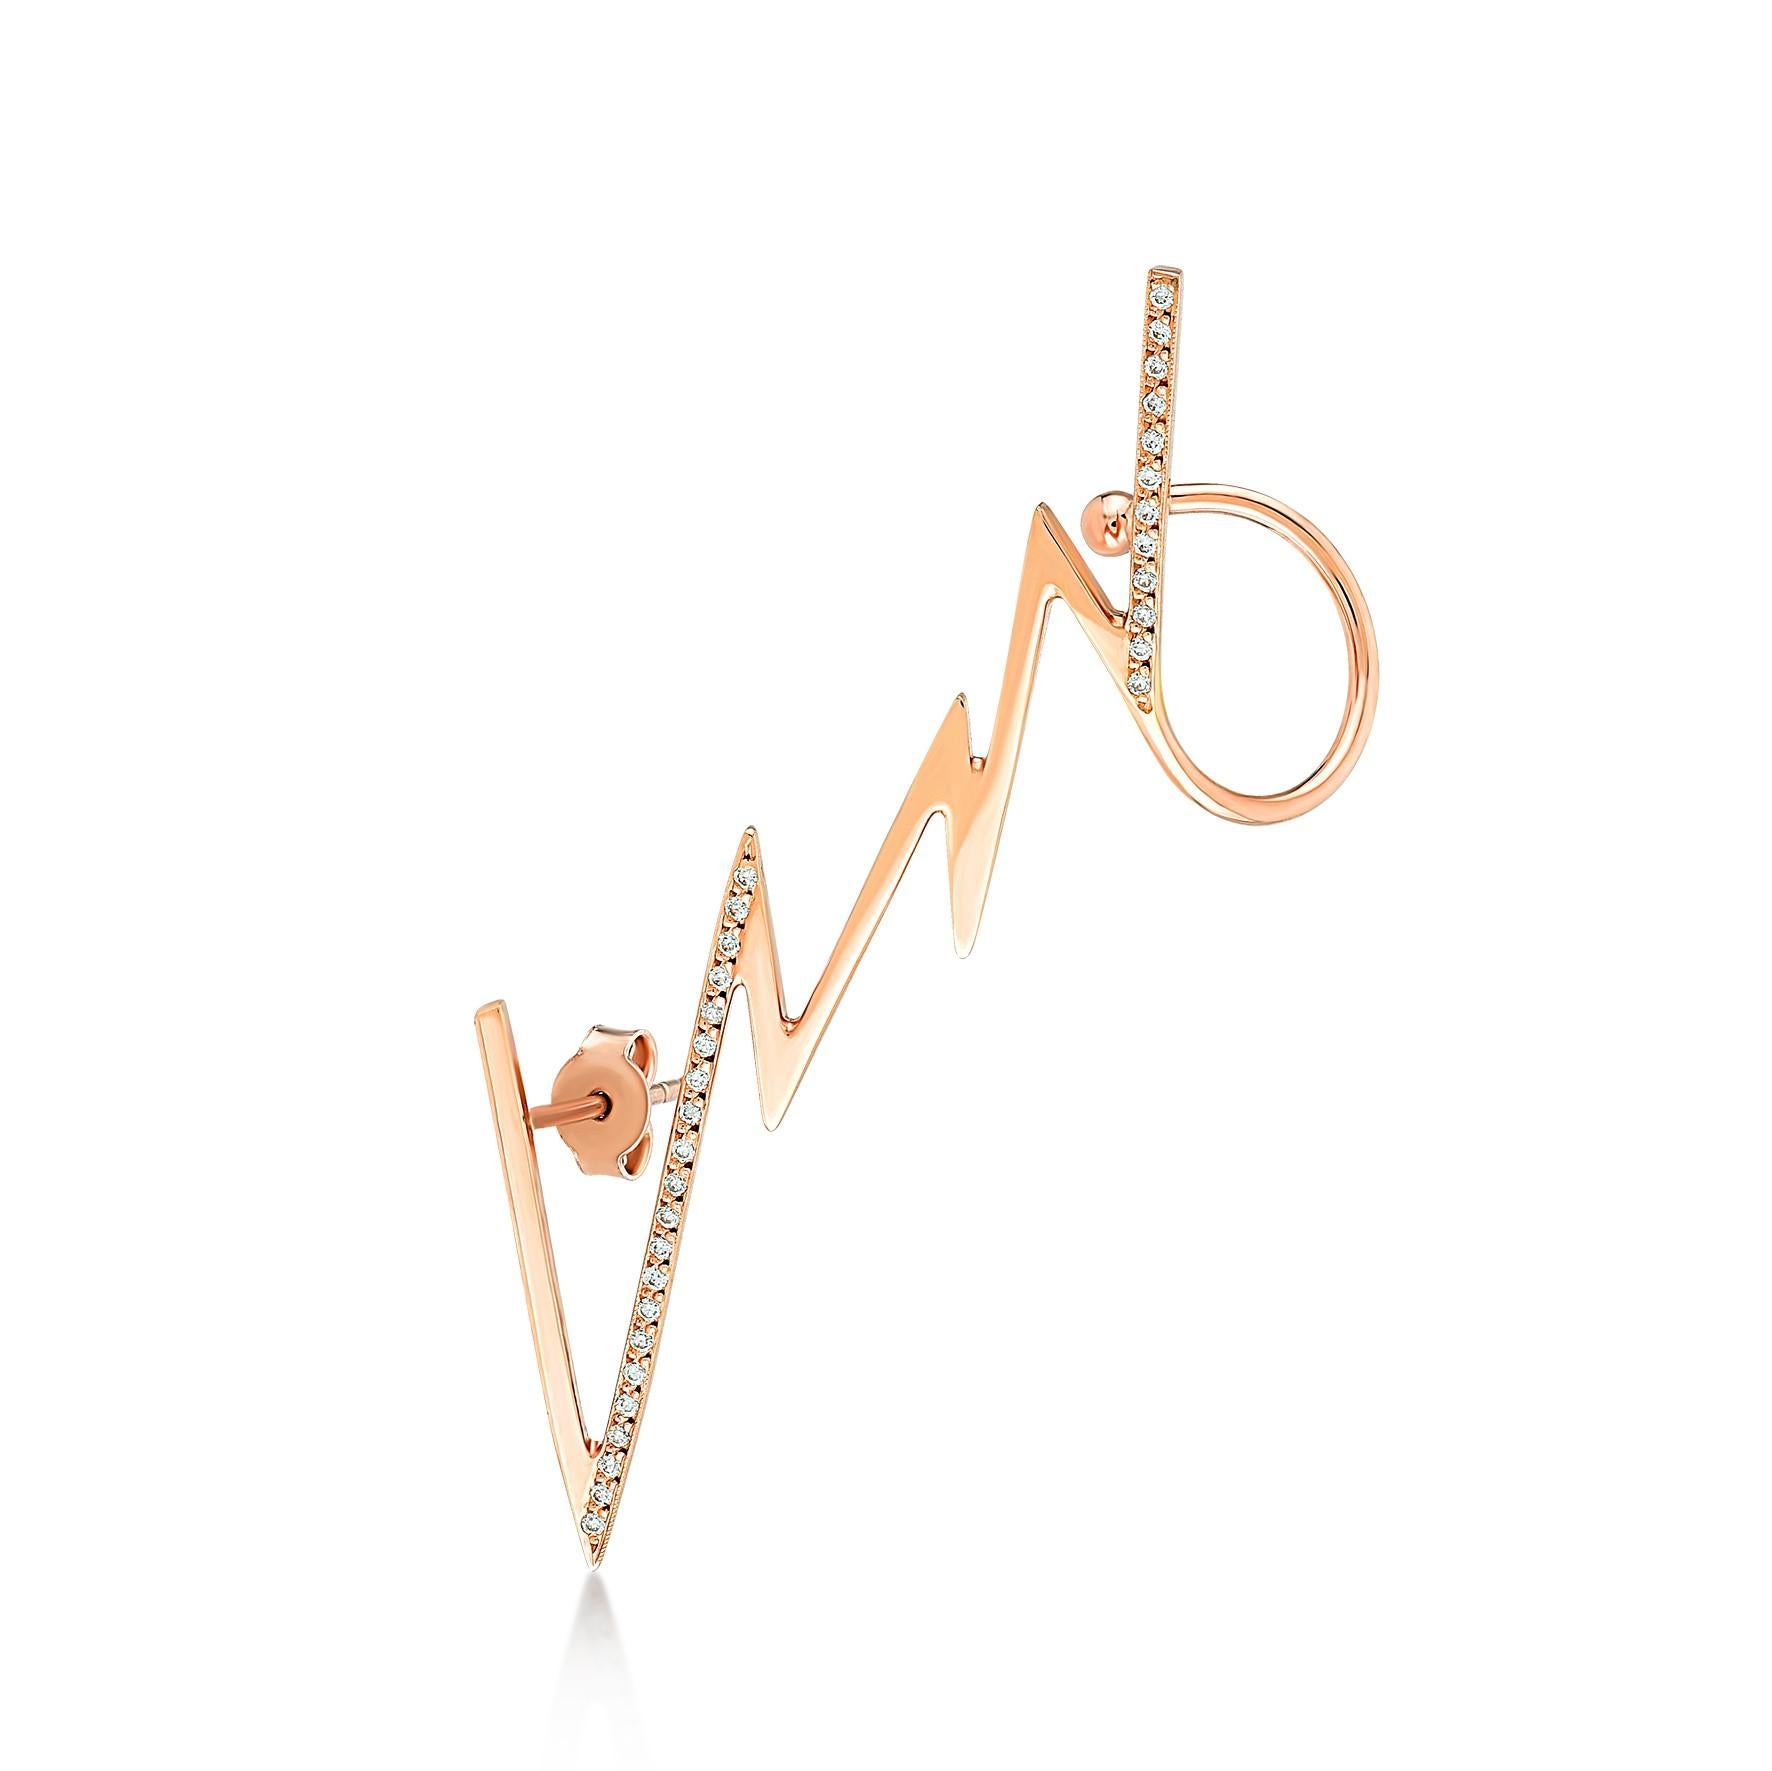 The Thunder Collection represents the power within yourself as the lightning design has always had a deep and strong meaning in history and legends. 

White diamond lightning ear cuff (single) in 14k rose gold by selda jewellery

Additional